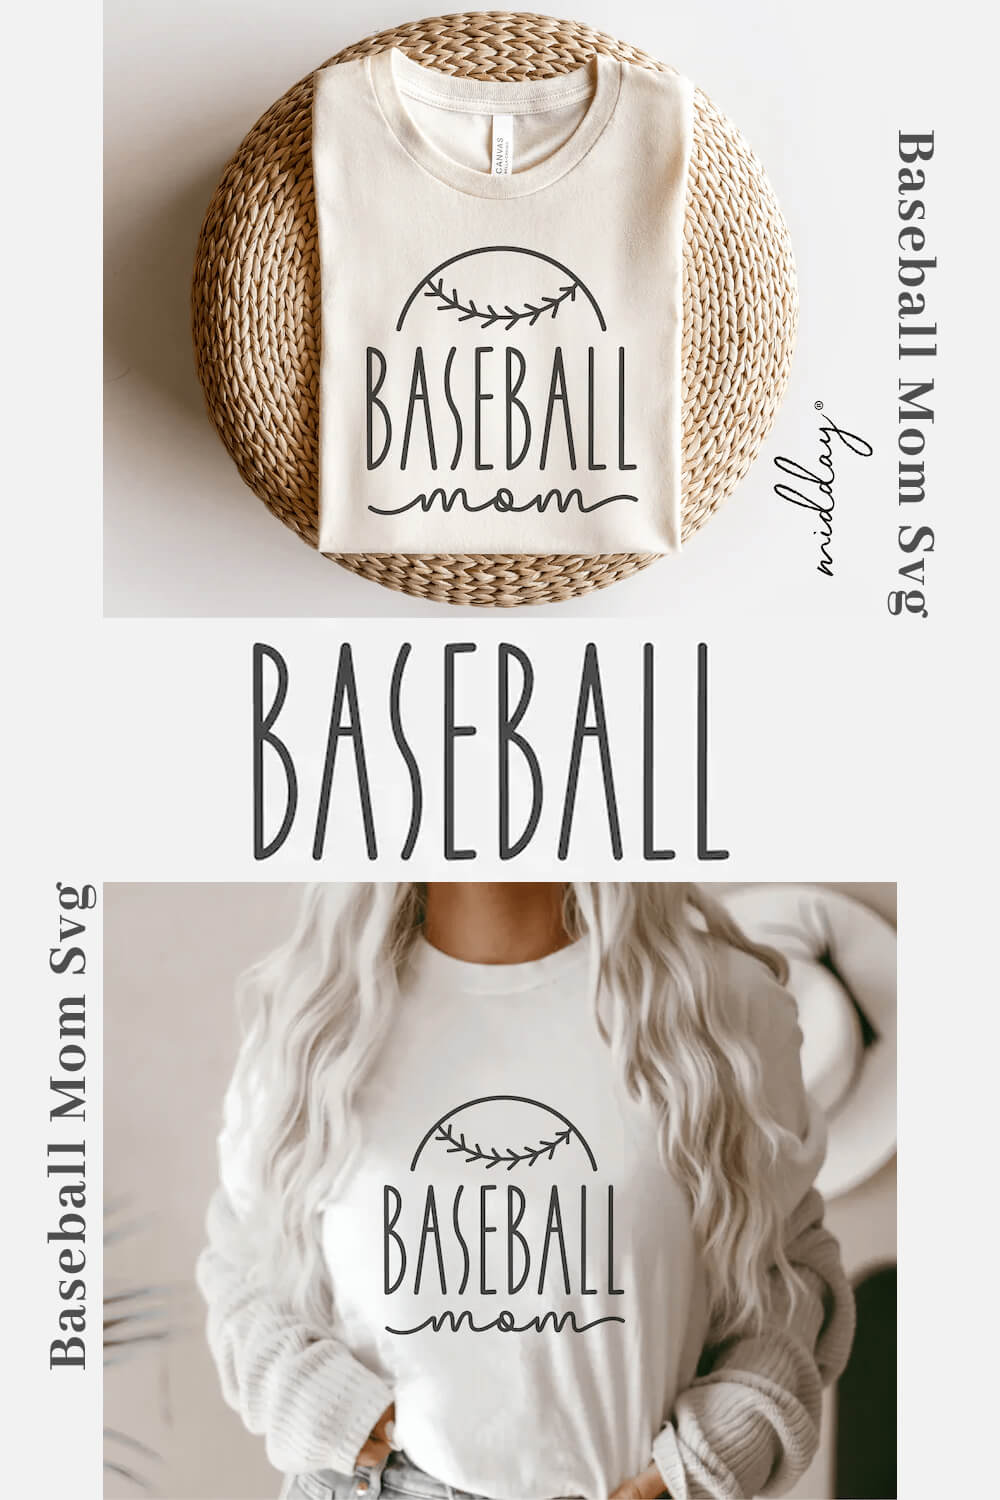 Beige t-shirt with "Baseball" logo print on wicker cap and t-shirt on blonde.